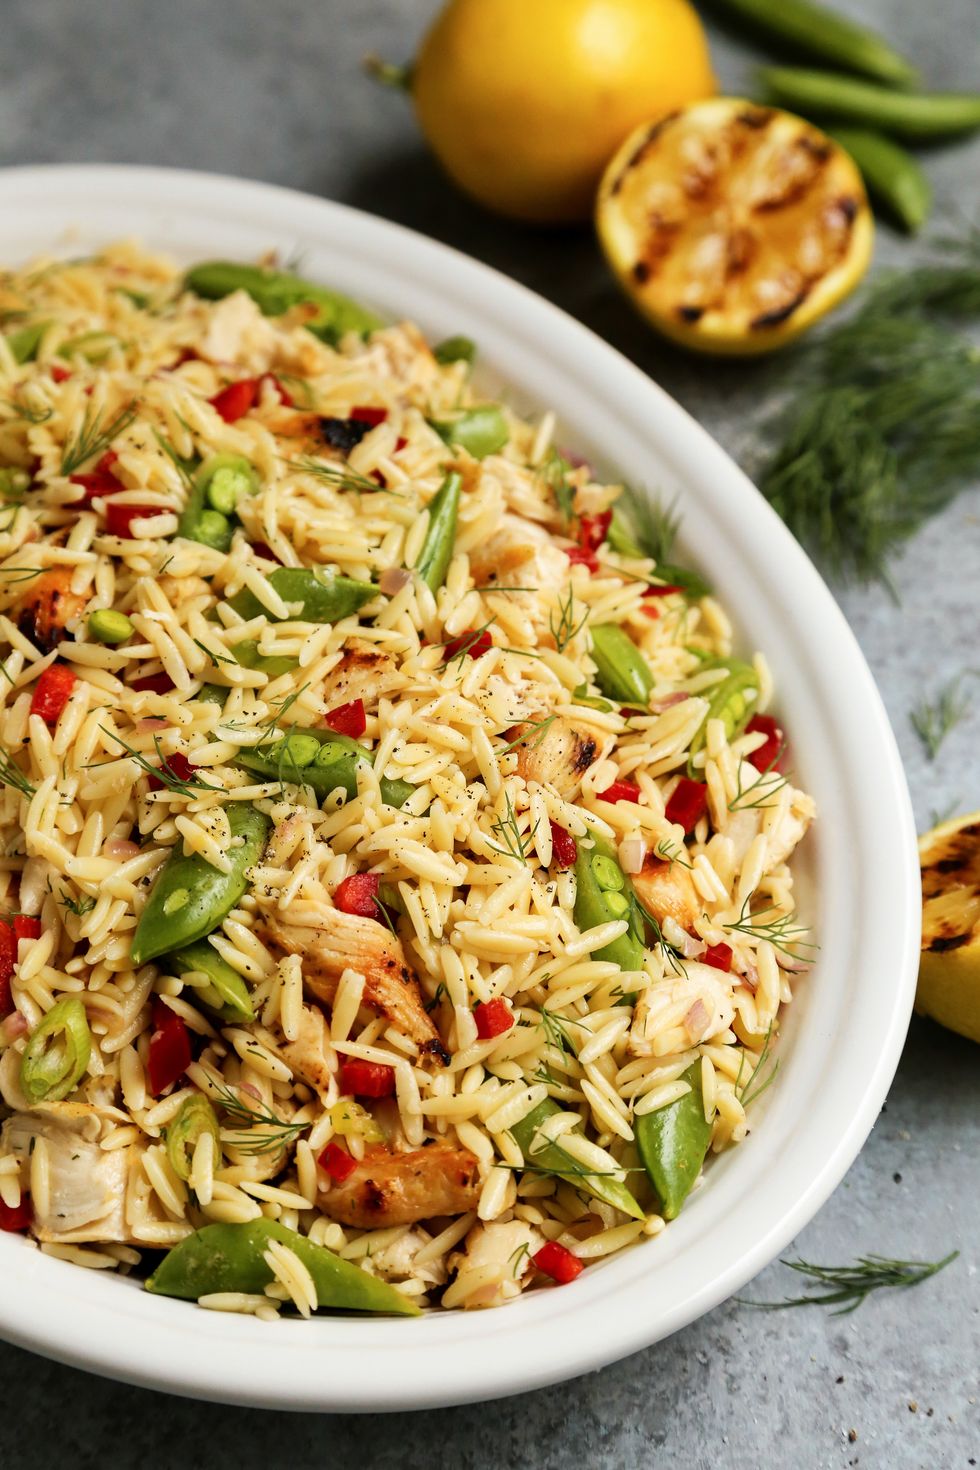 Grilled Chicken and Lemon Orzo Salad